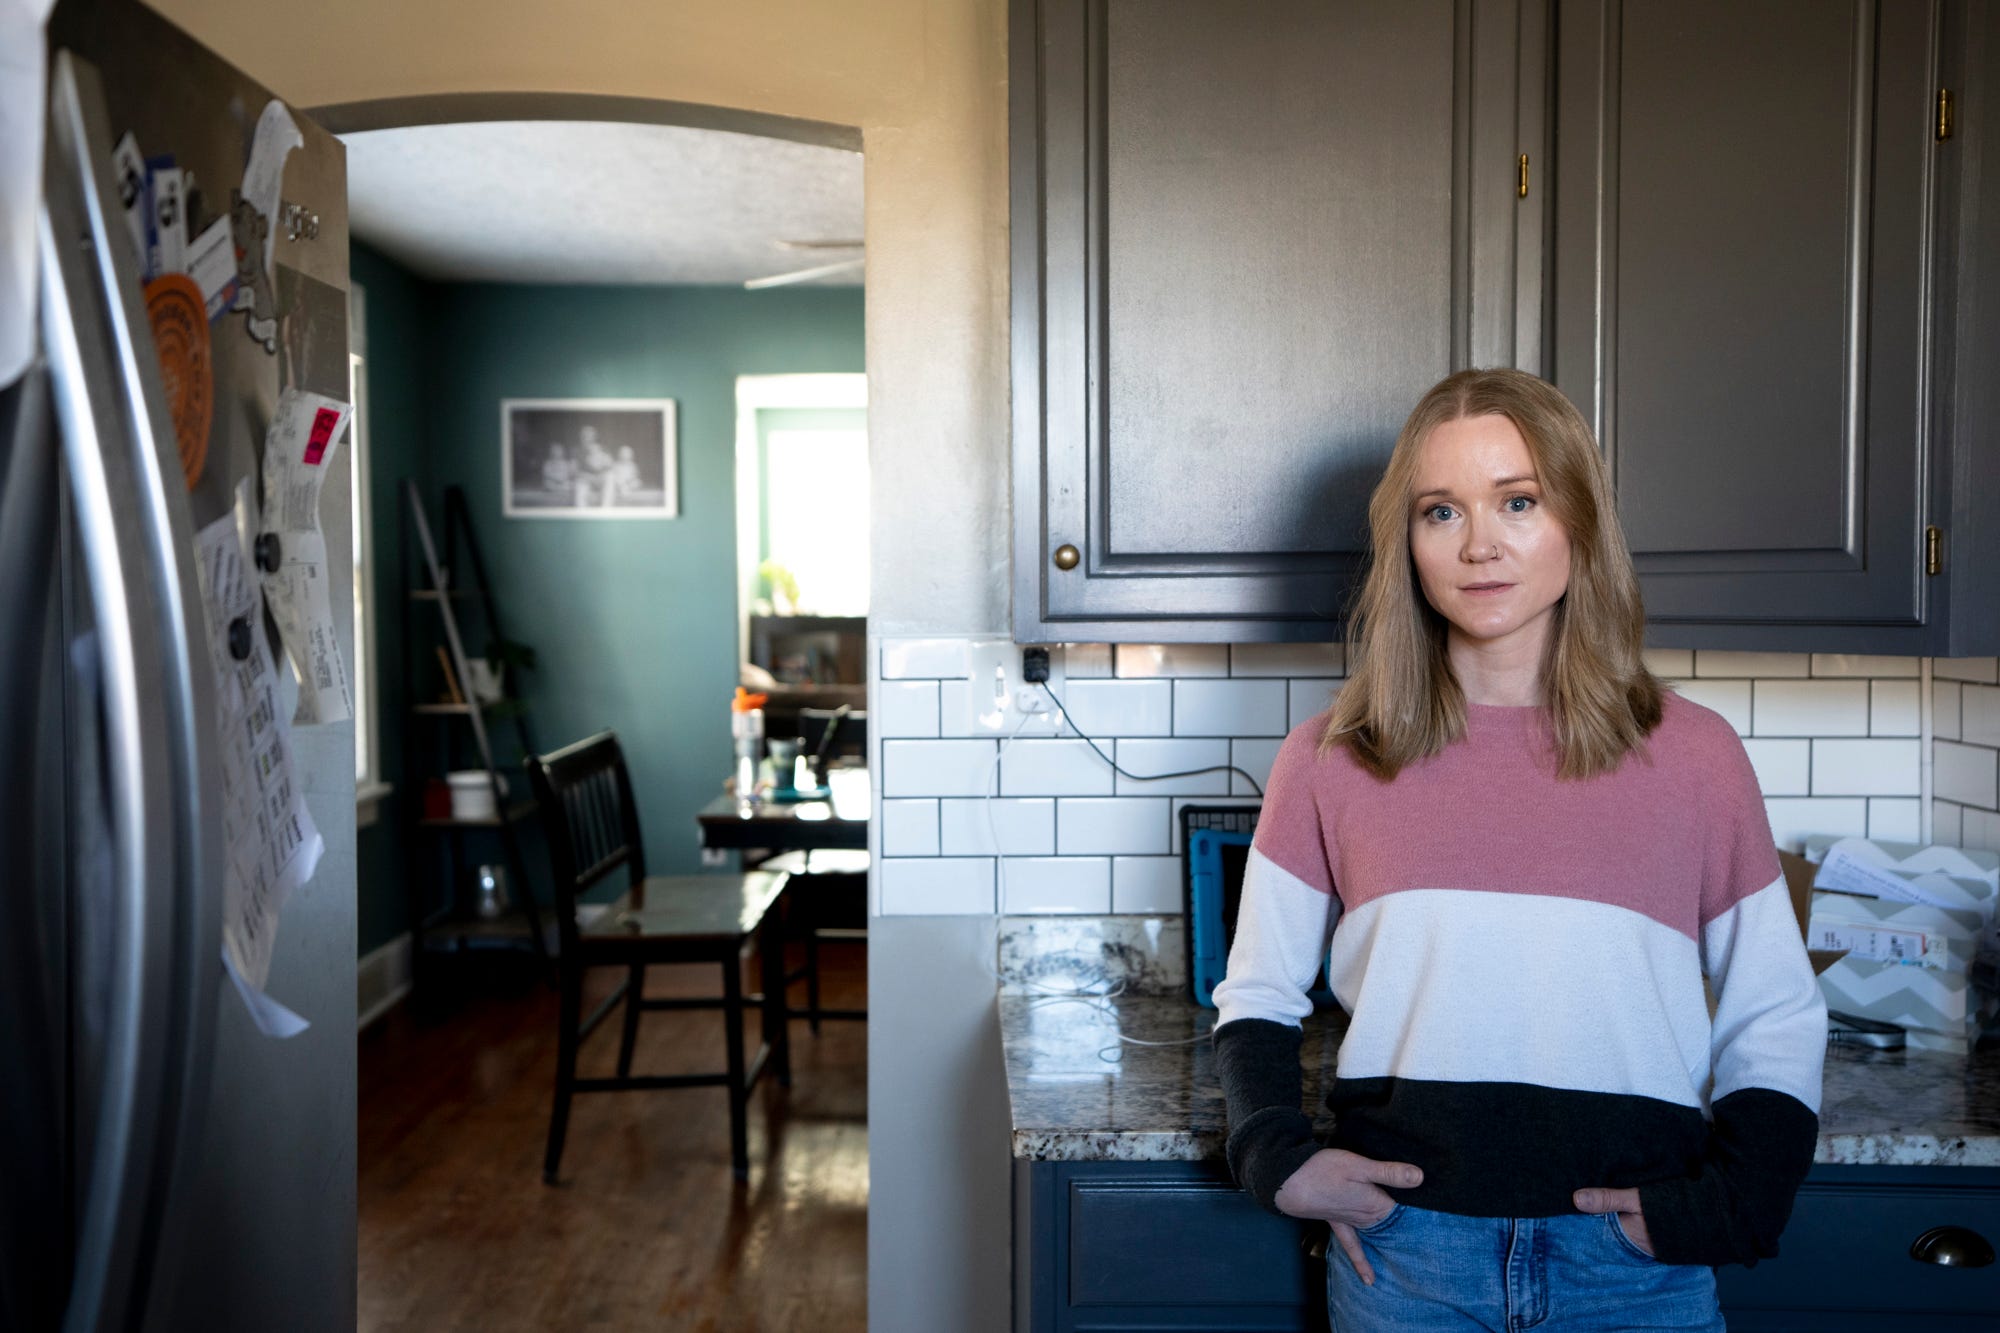 Liesl Neyer stands inside her home on Sunday, Feb. 12, 2023. Liesl’s husband, Paul, decided to come forward with abuse allegations against Father Geoff Drew almost 30 years after he was abused. 